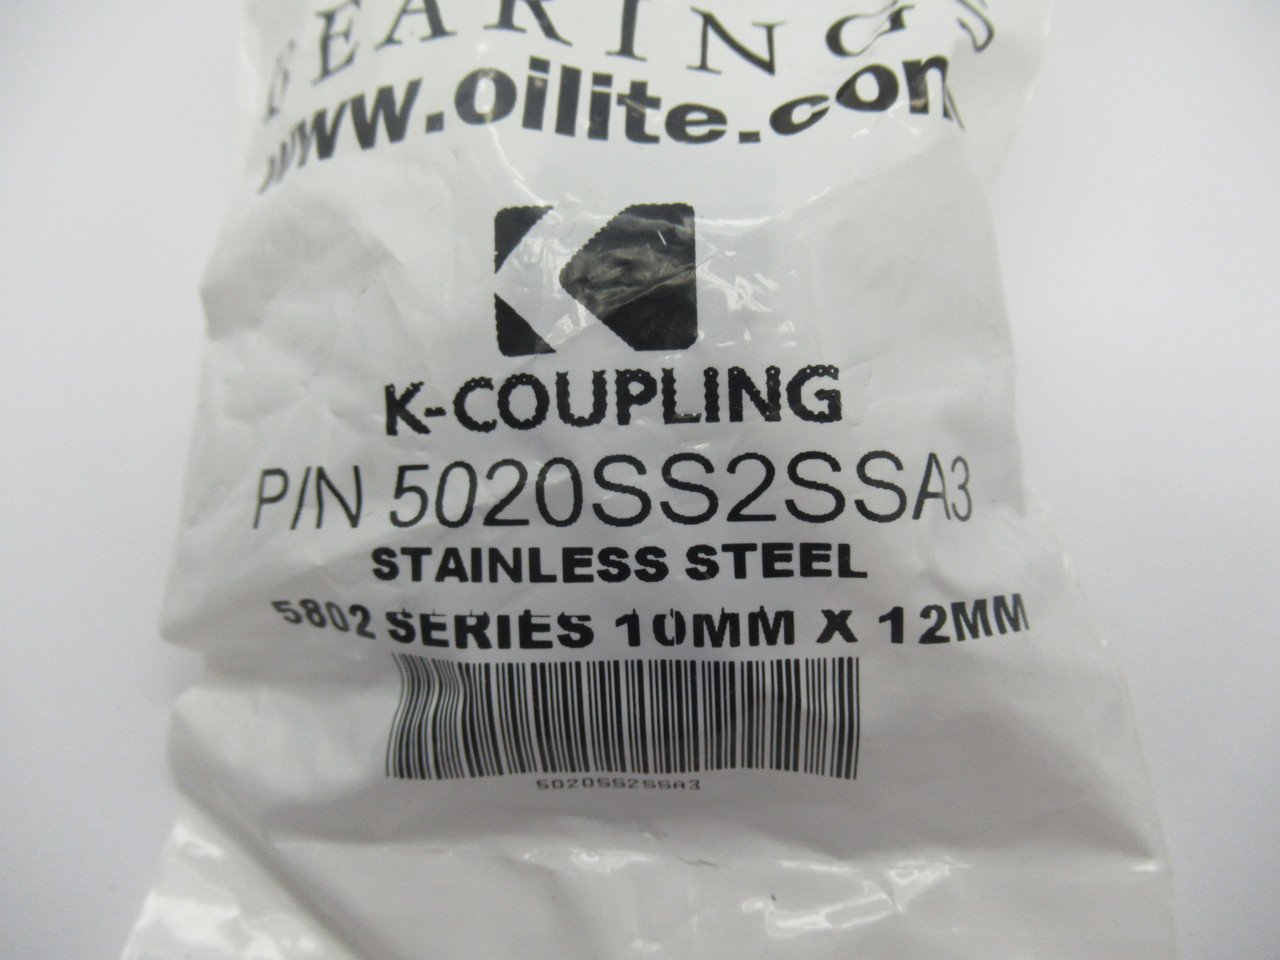 Oilite 5020SS2SSA3 K- Coupling Stainless Steel 10mm x12mm NWB